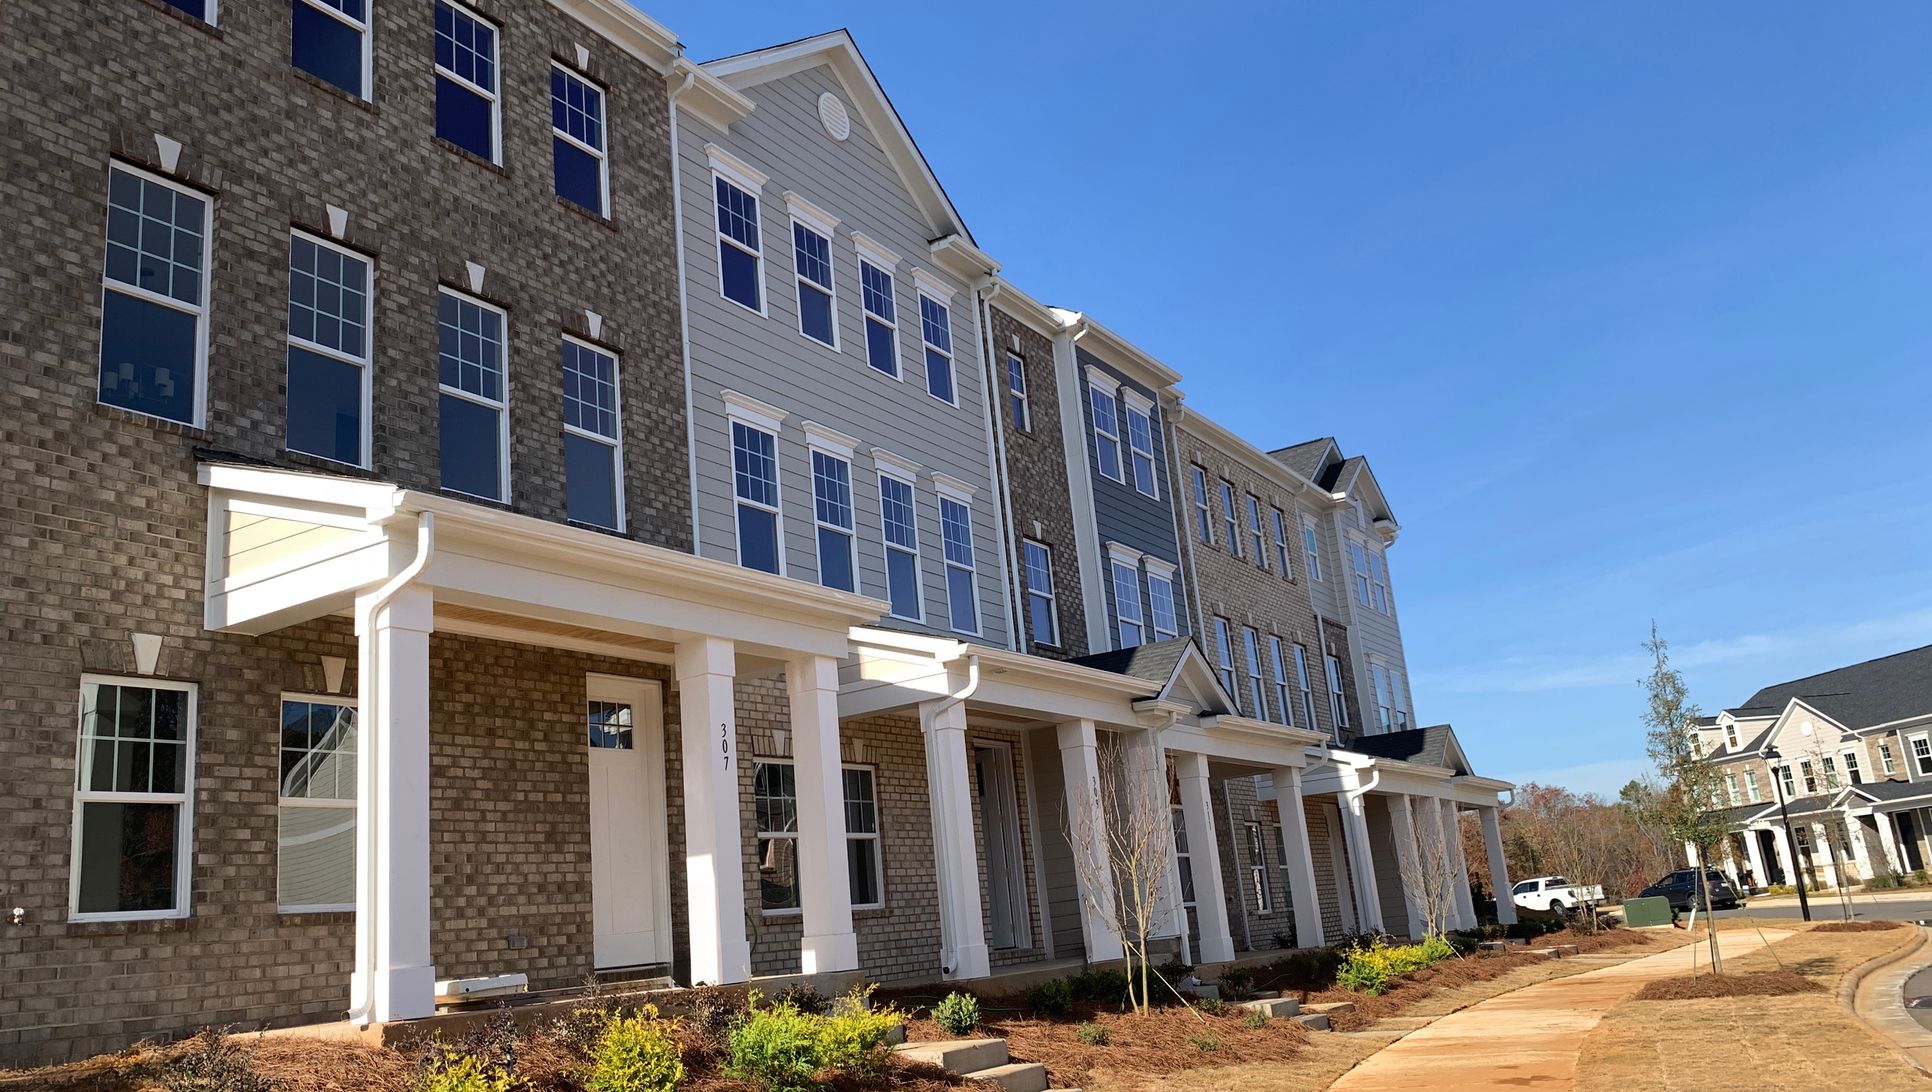 Townes 3-Story Exterior:THe Townes at Cramerton Mills 3-Story Townhomes